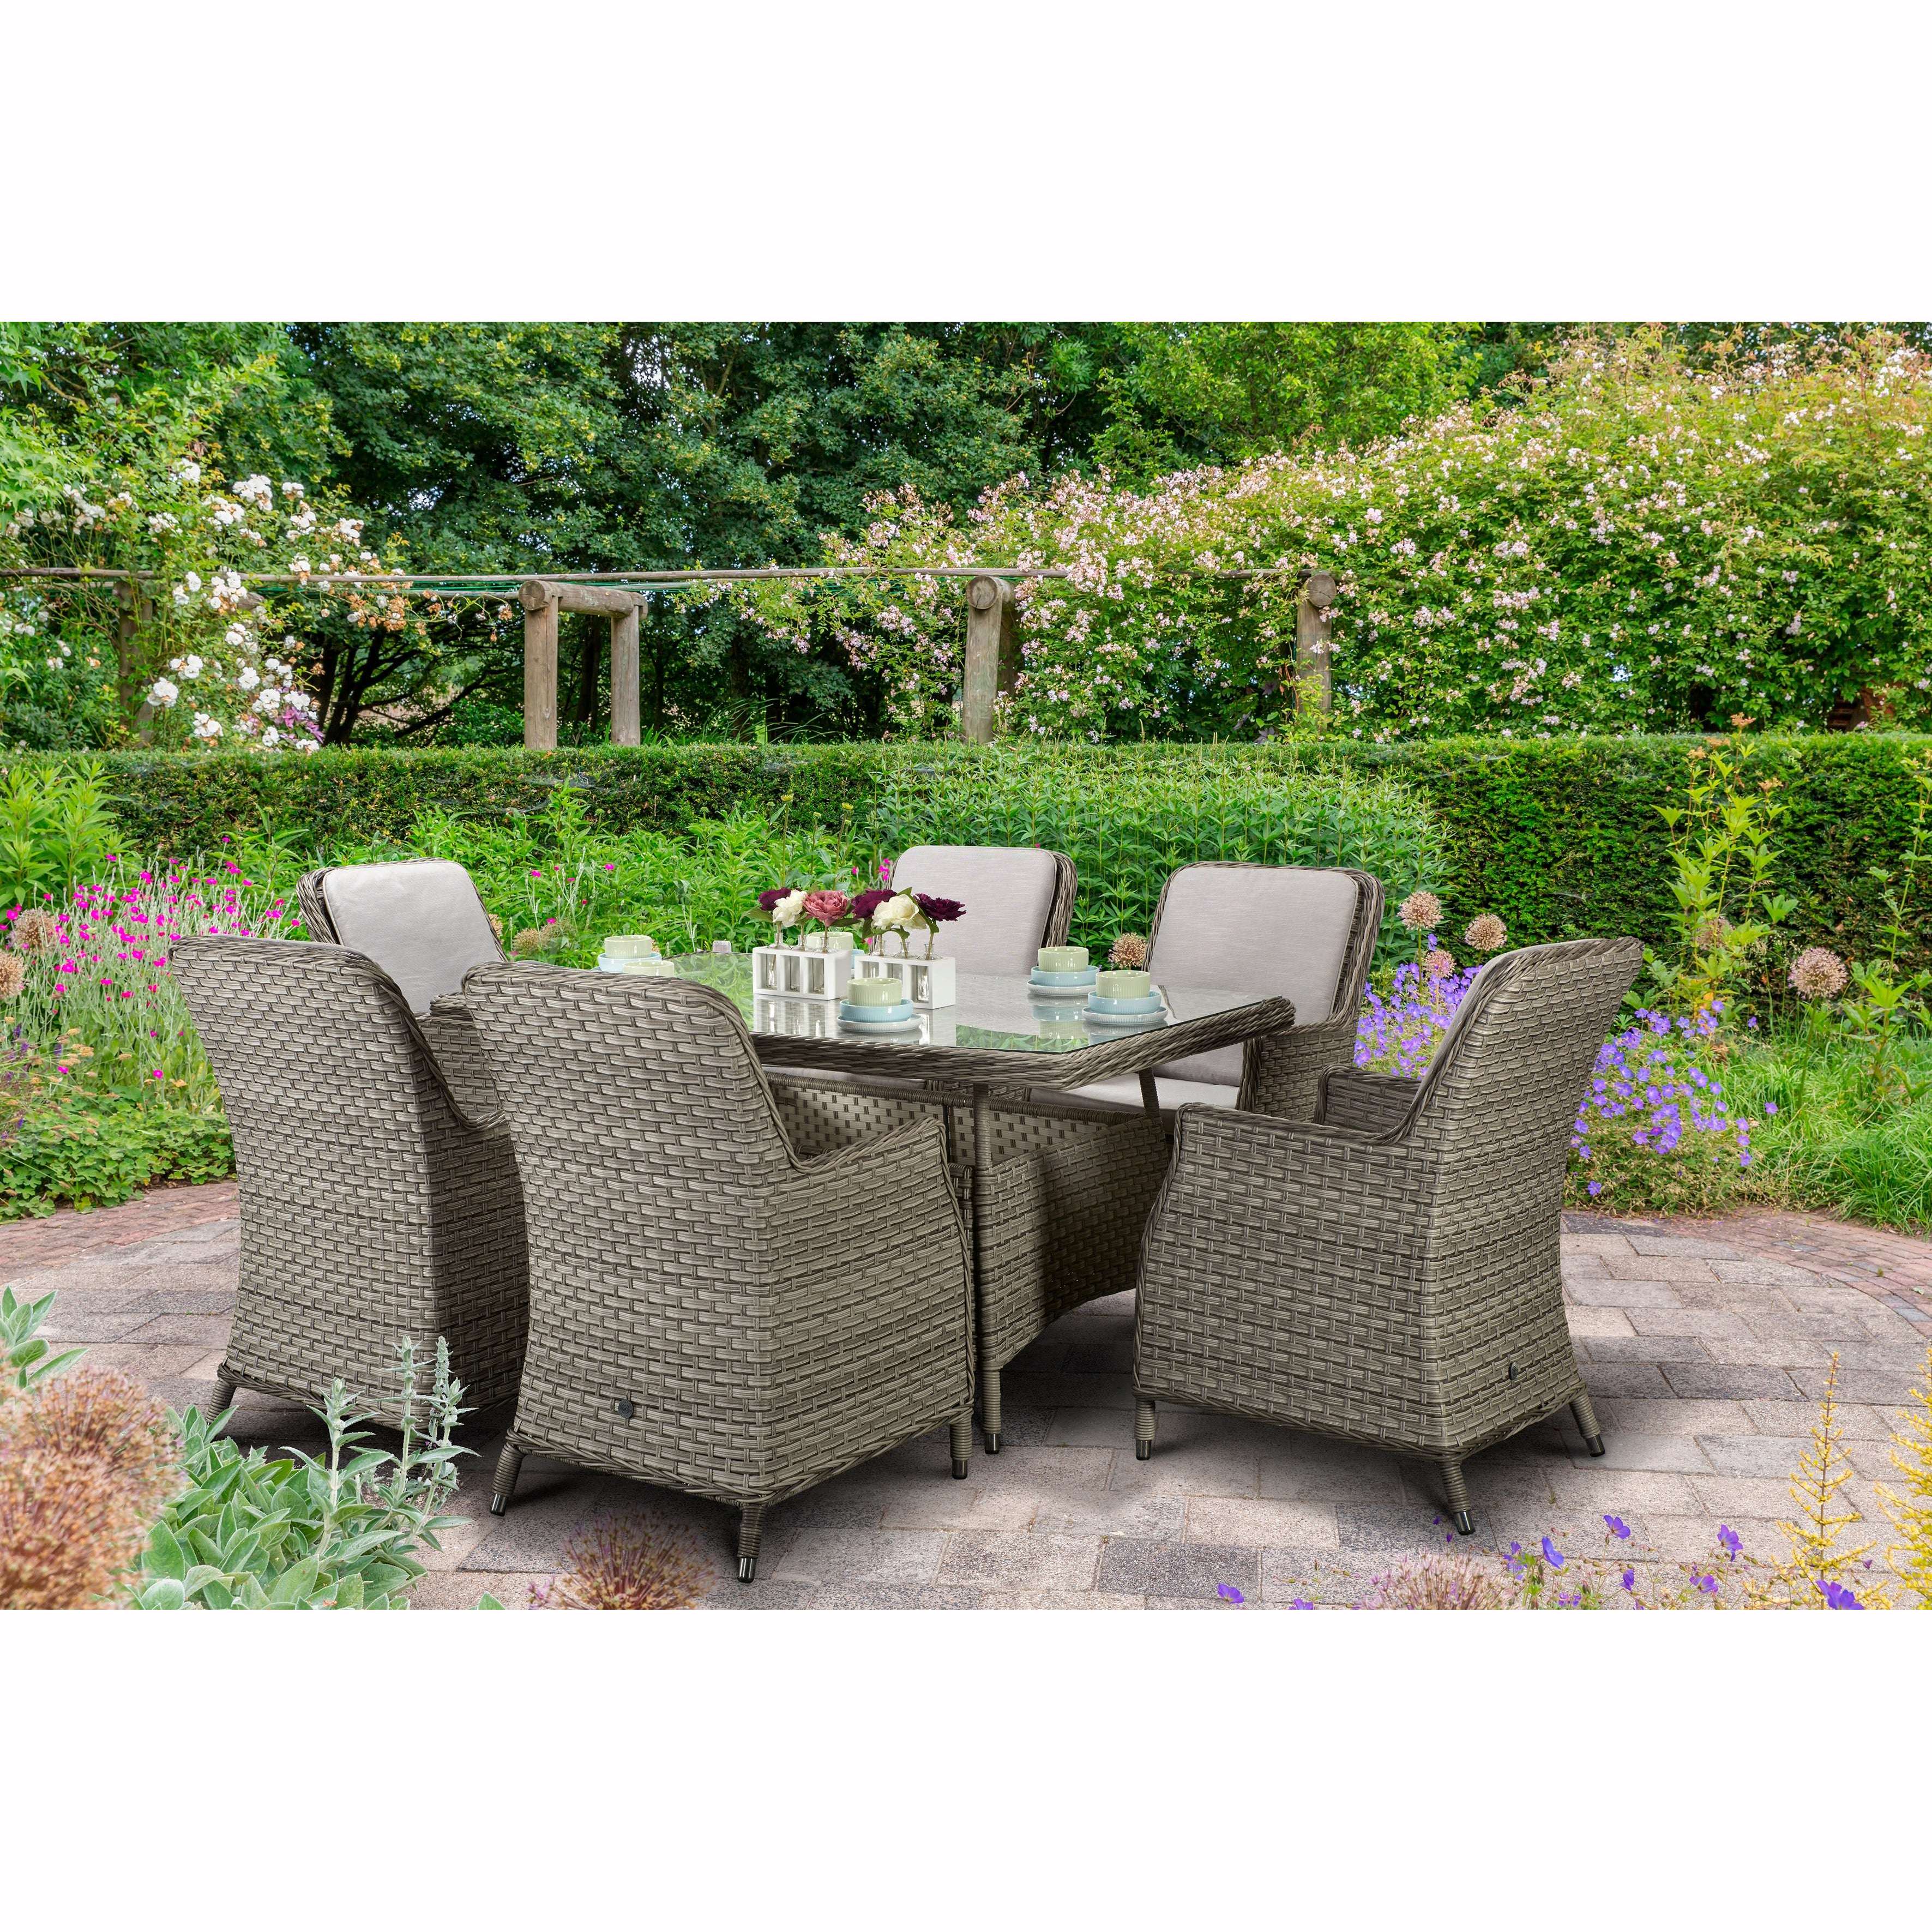 Exceptional Garden:Signature Weave Edwina Dining Set - 3 Wicker Special Grey